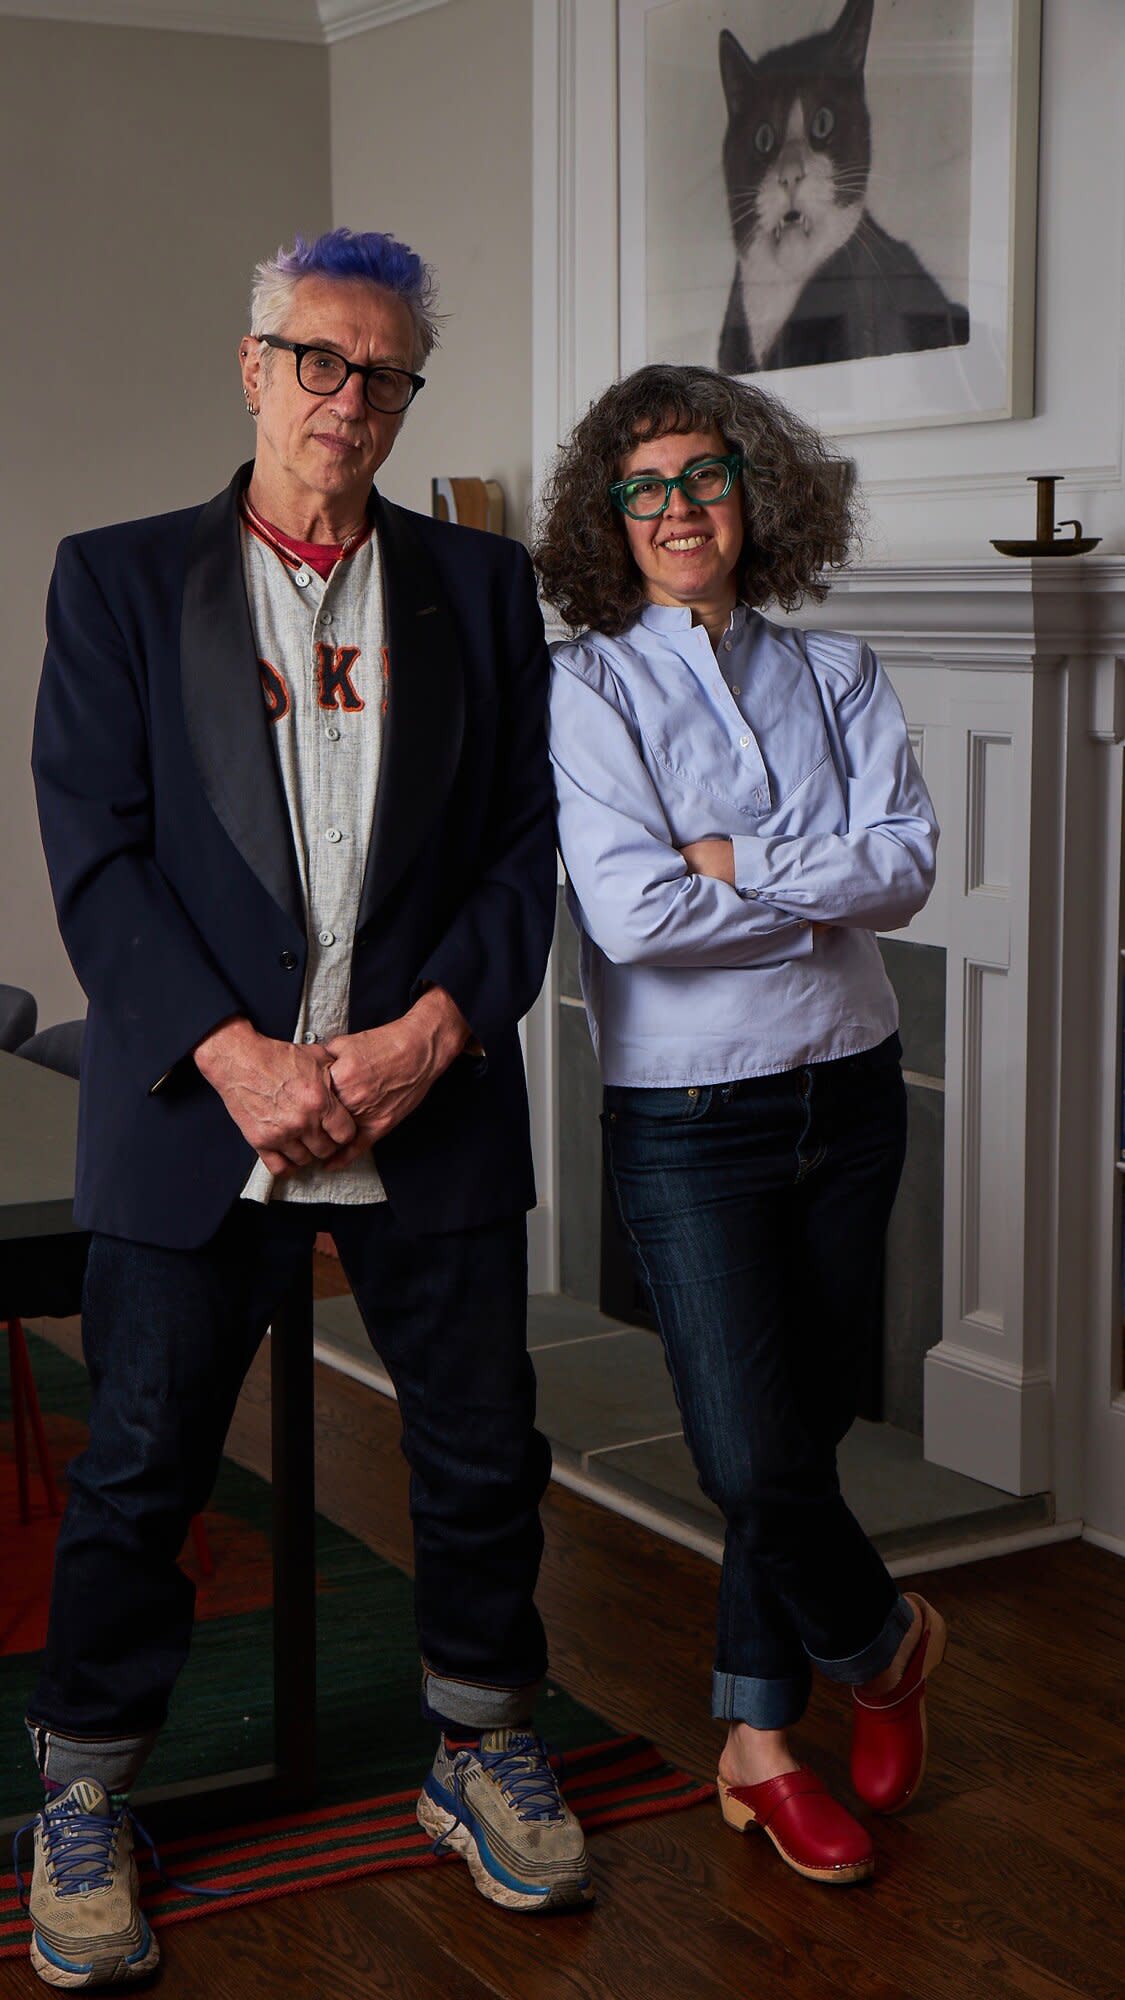 Co-creators Arielle Eckstut and David Henry Sterry of America's Next Great Author